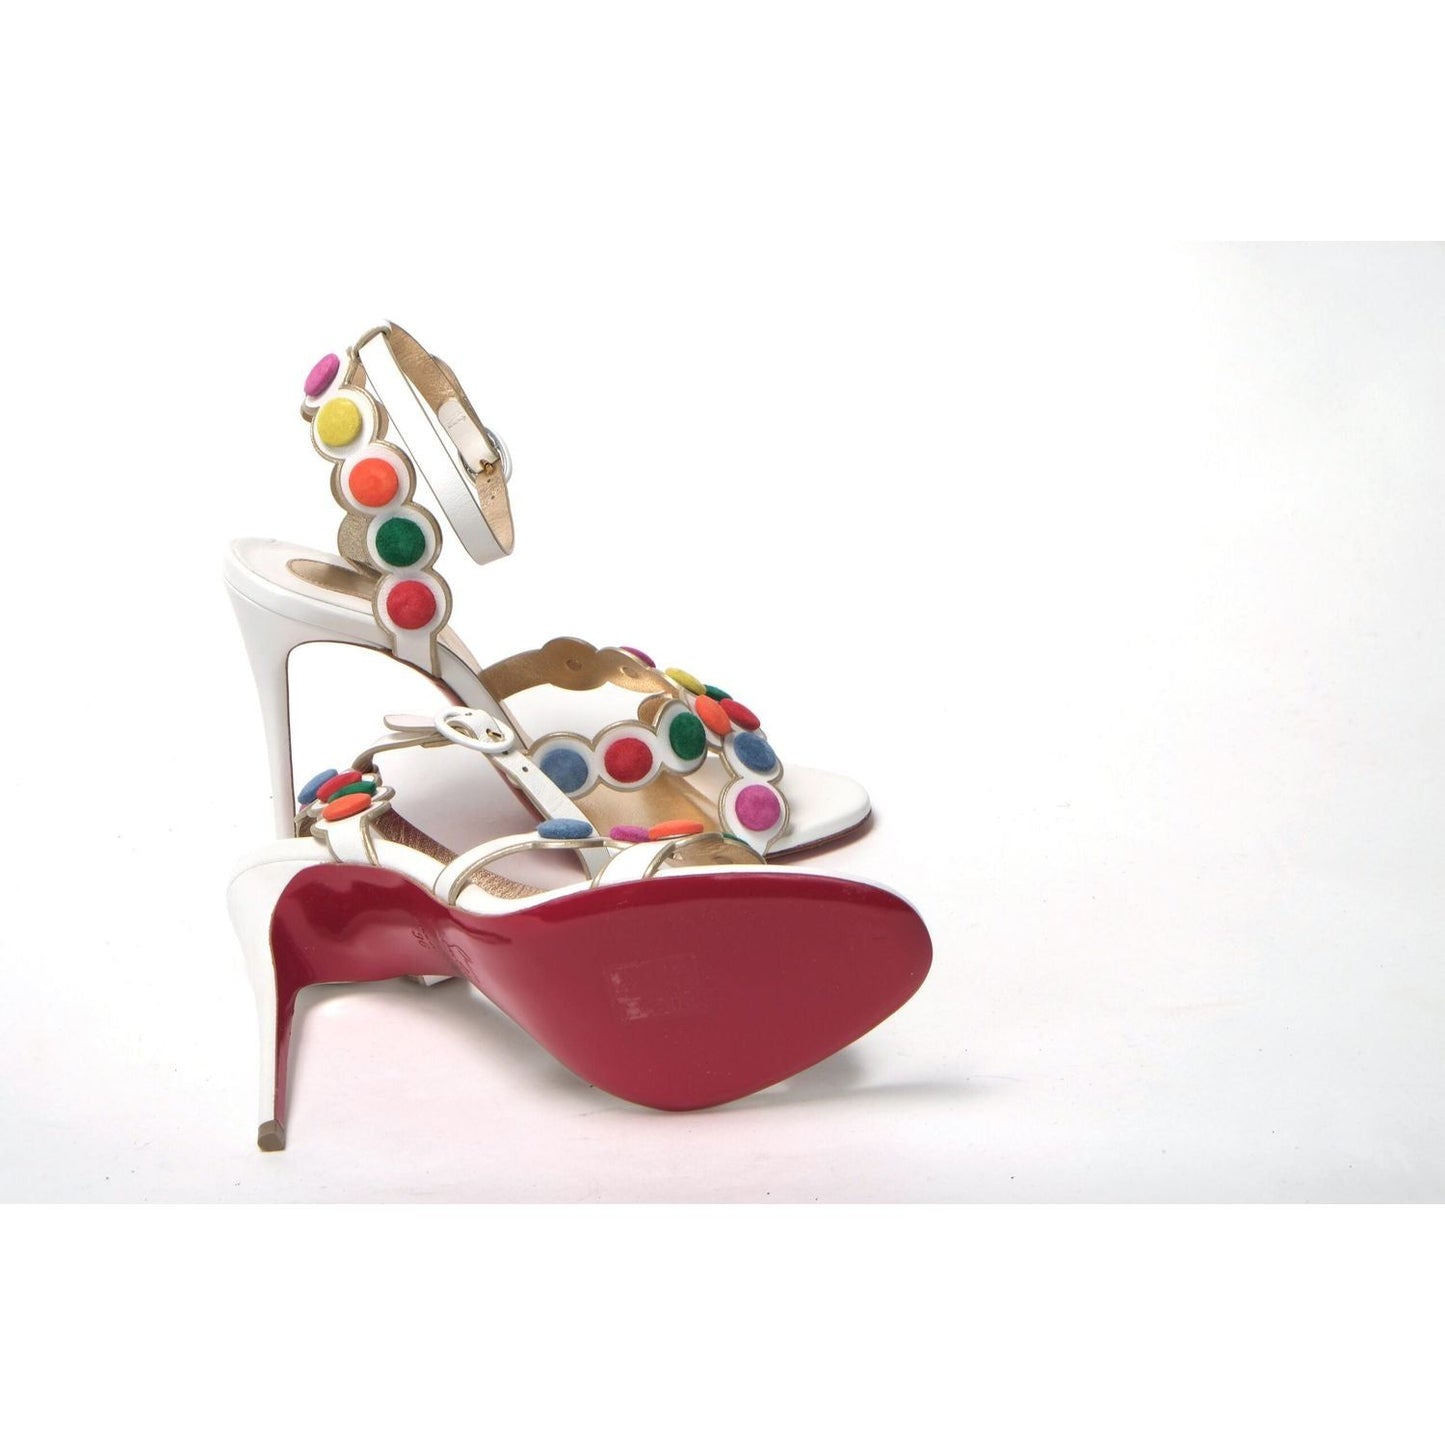 Christian Louboutin White Multicolor Spot Design High Heels Shoes Sandal white-multicolor-spot-design-high-heels-shoes-sandal CL027-SMARTISSIMA-100-KID-IRISE-LINING-VERS-MULTI_LIN-MEKONGWHITE-AND-MULTI-5-SOLE-EXTRA-scaled-611d7c89-51d.jpg